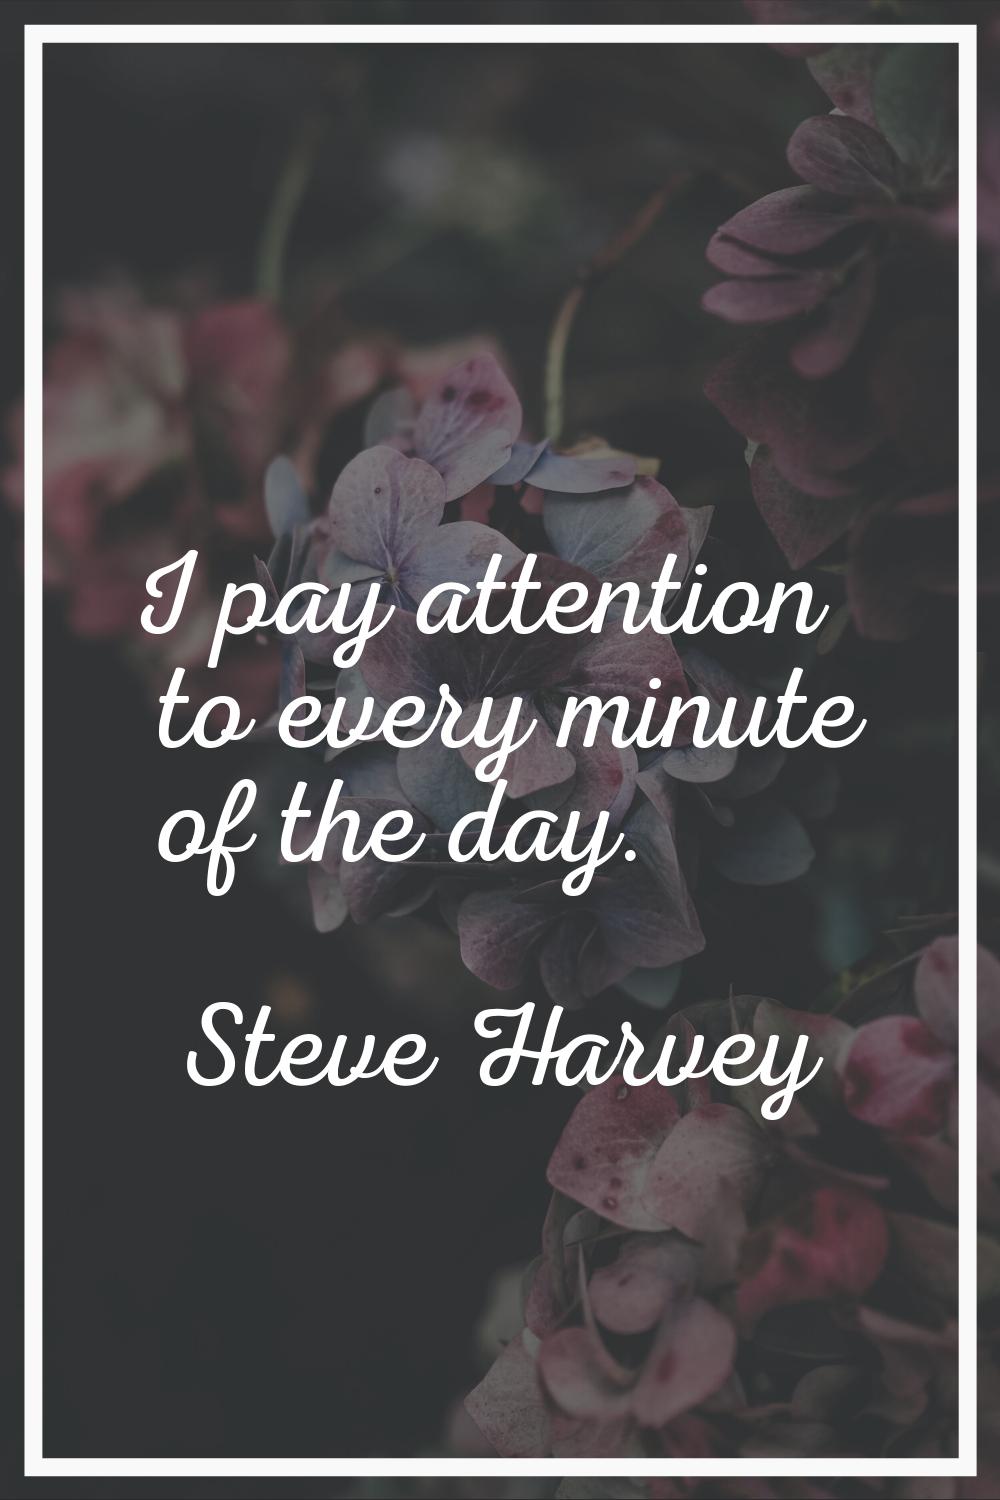 I pay attention to every minute of the day.